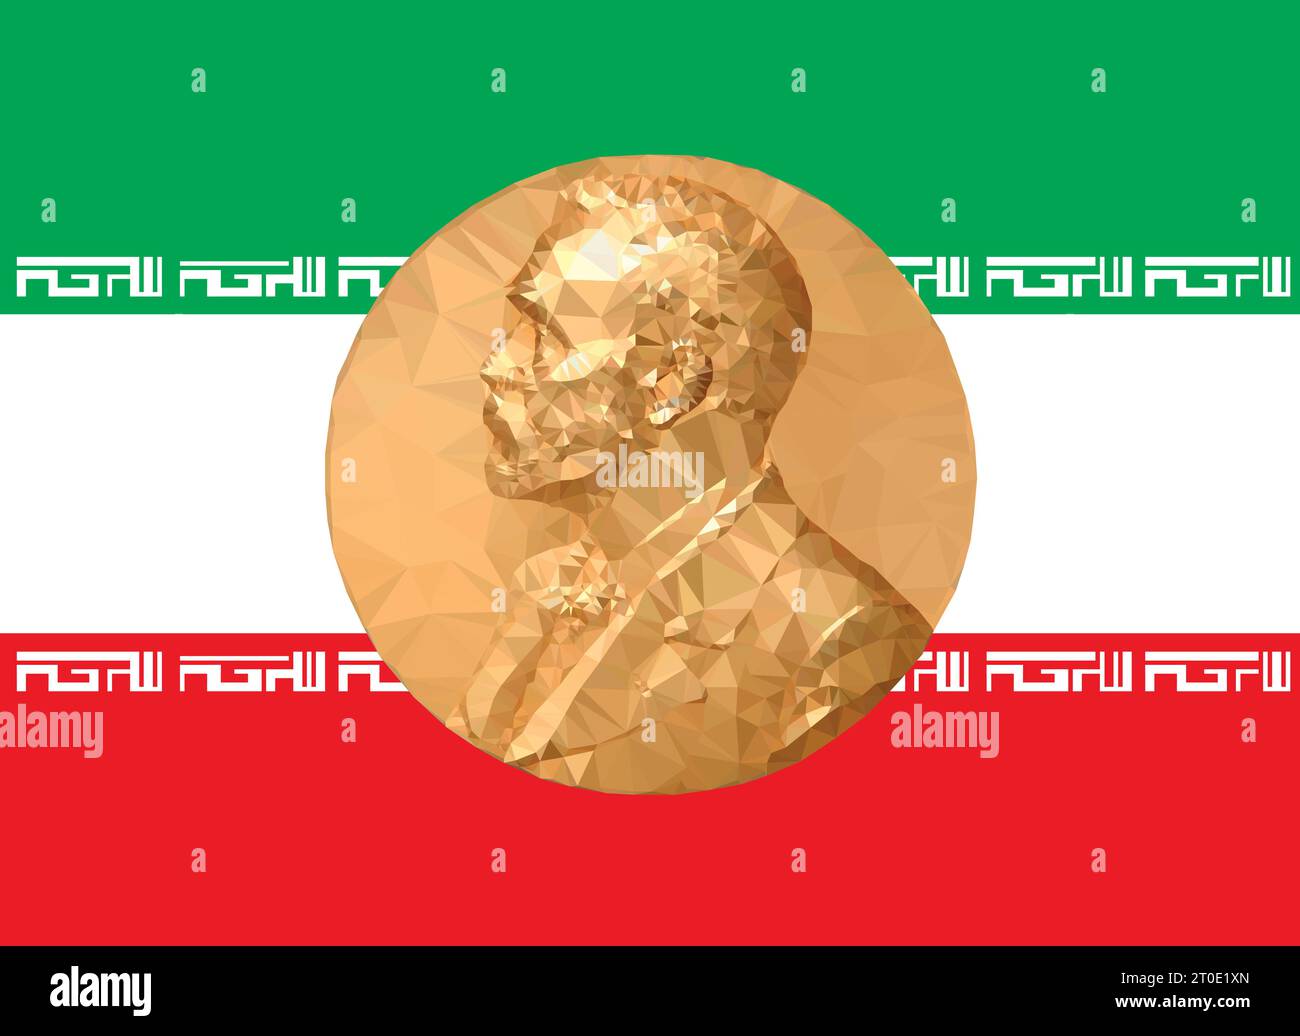 Gold Medal Nobel prize with Iran flag in background, vector illustration Stock Vector